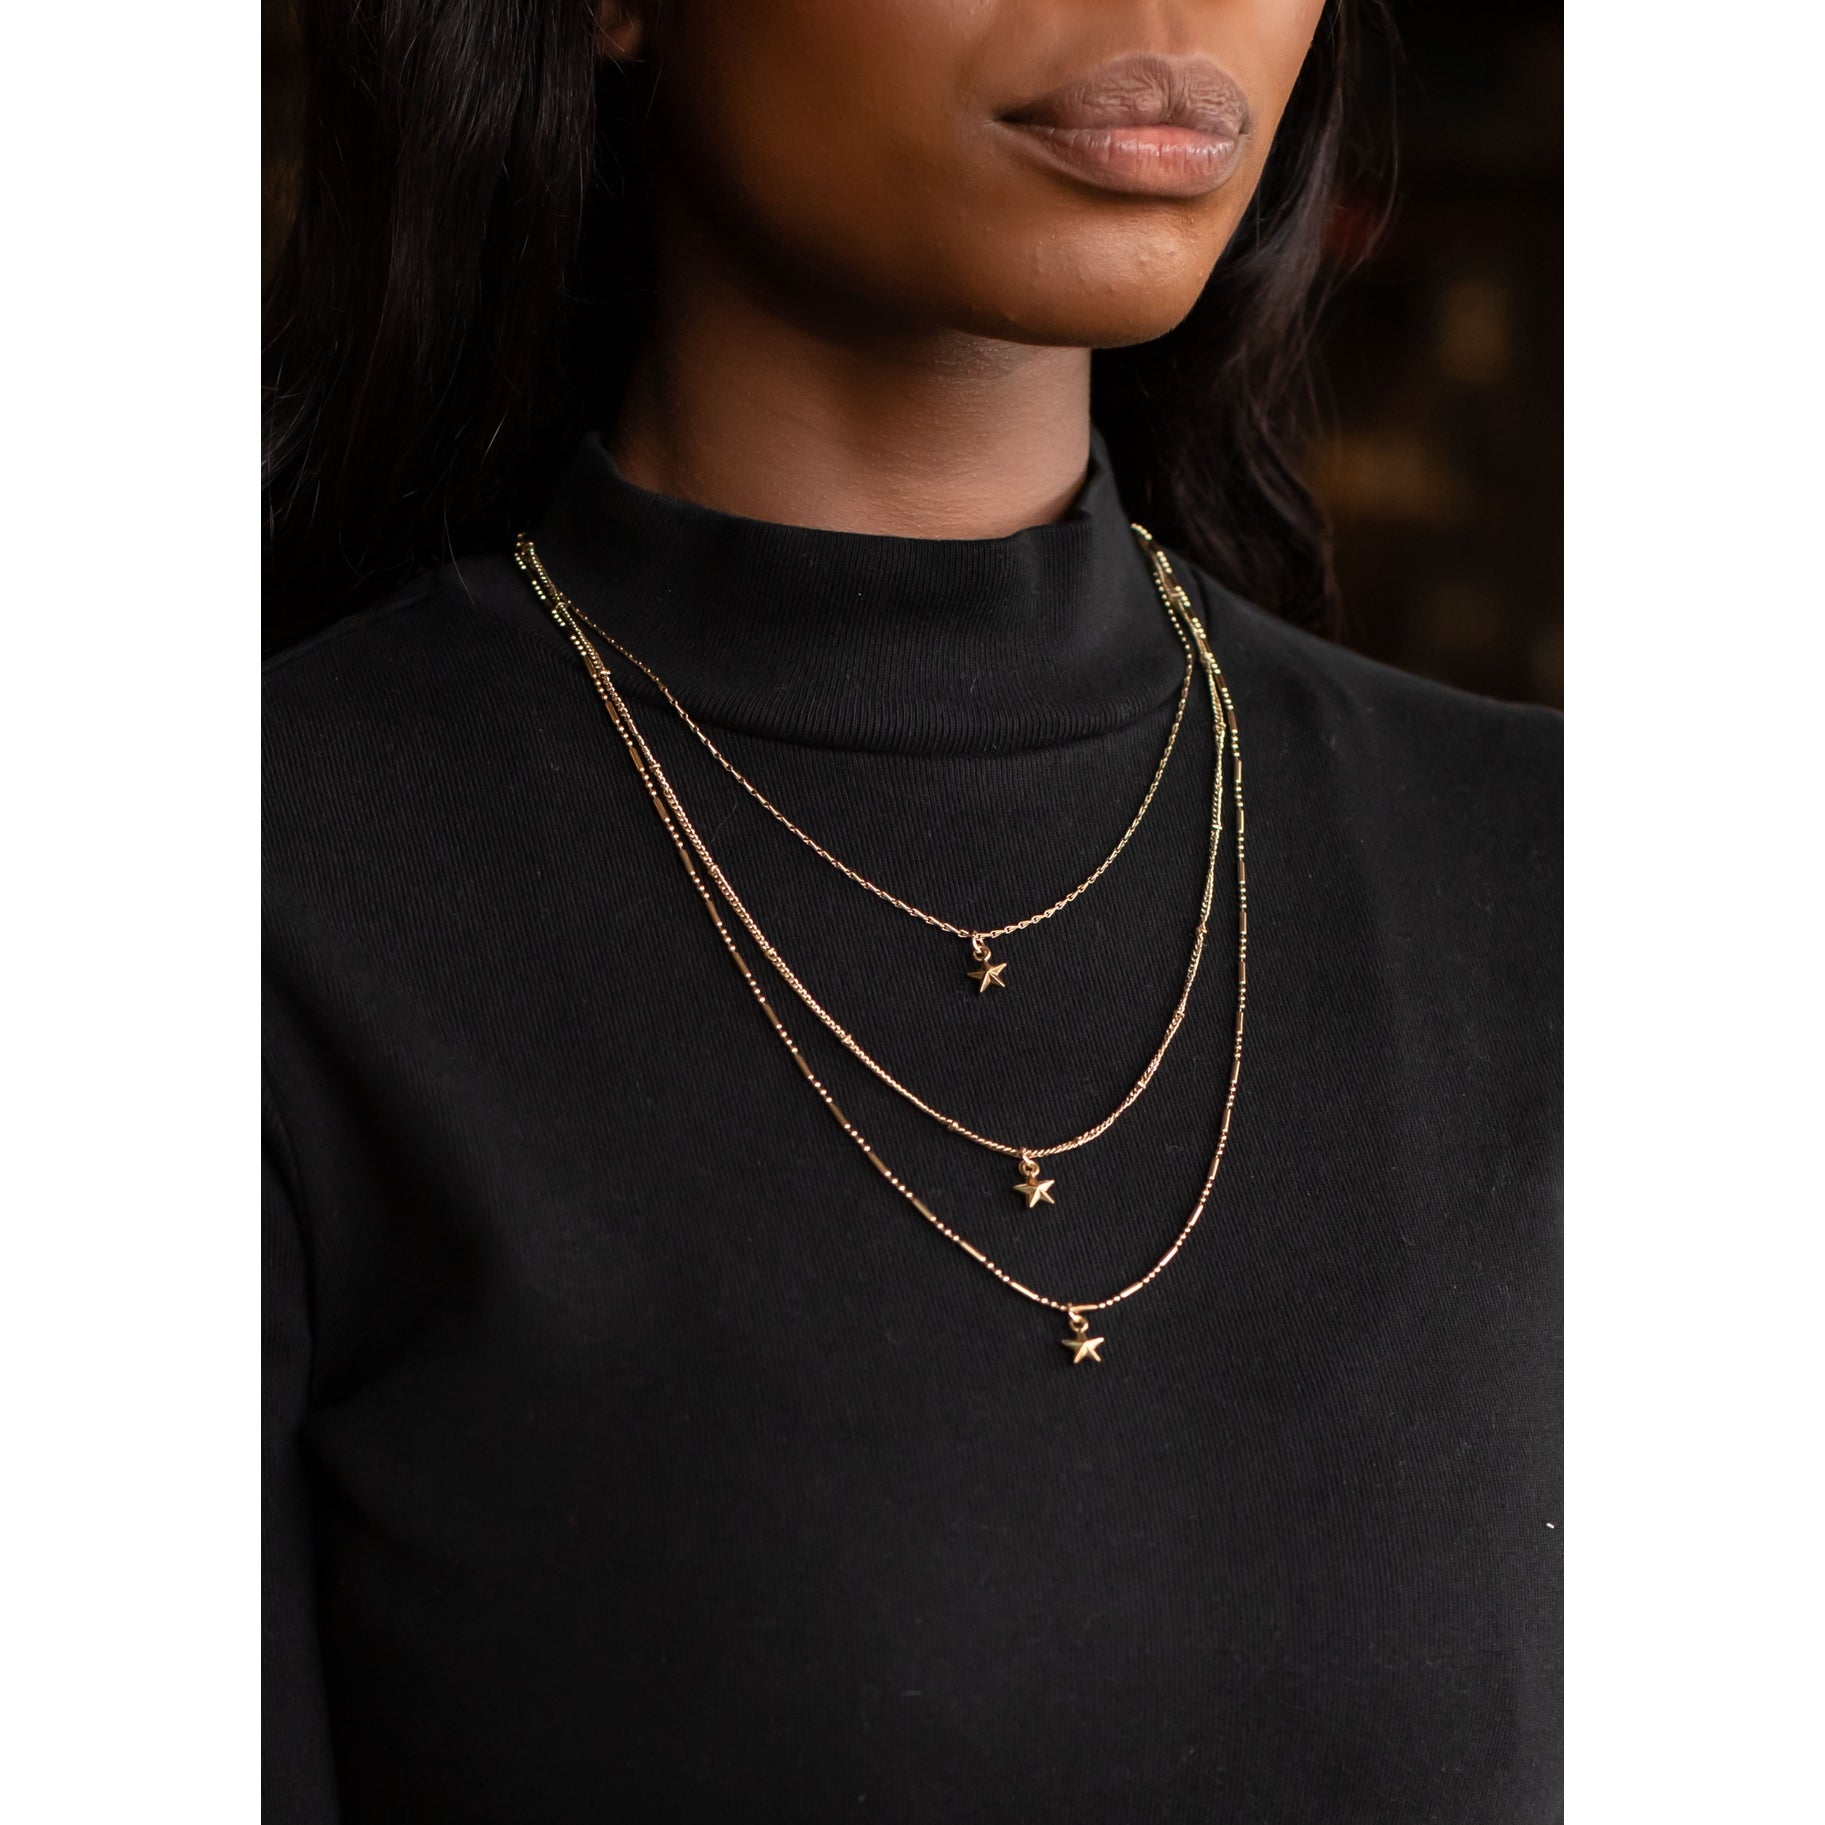 Gold Layered Necklace with Star Charms